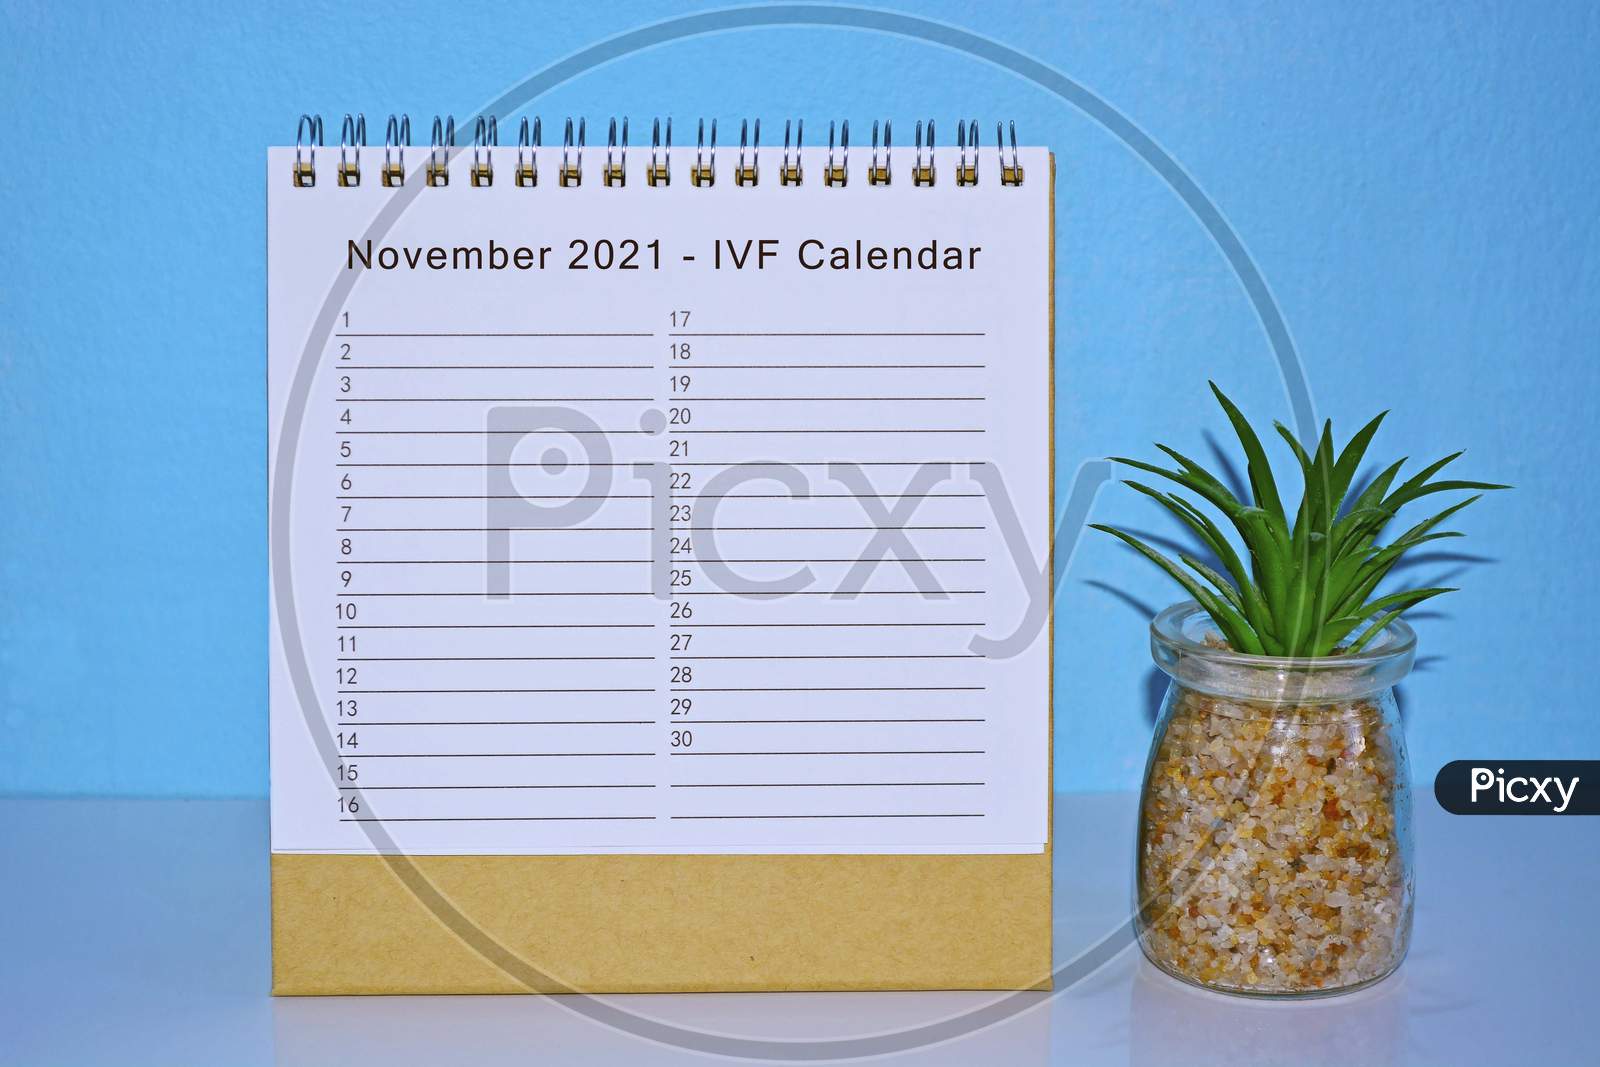 November 2021 Ivf Calendar And Appointment With Blue Background And Potted Plant